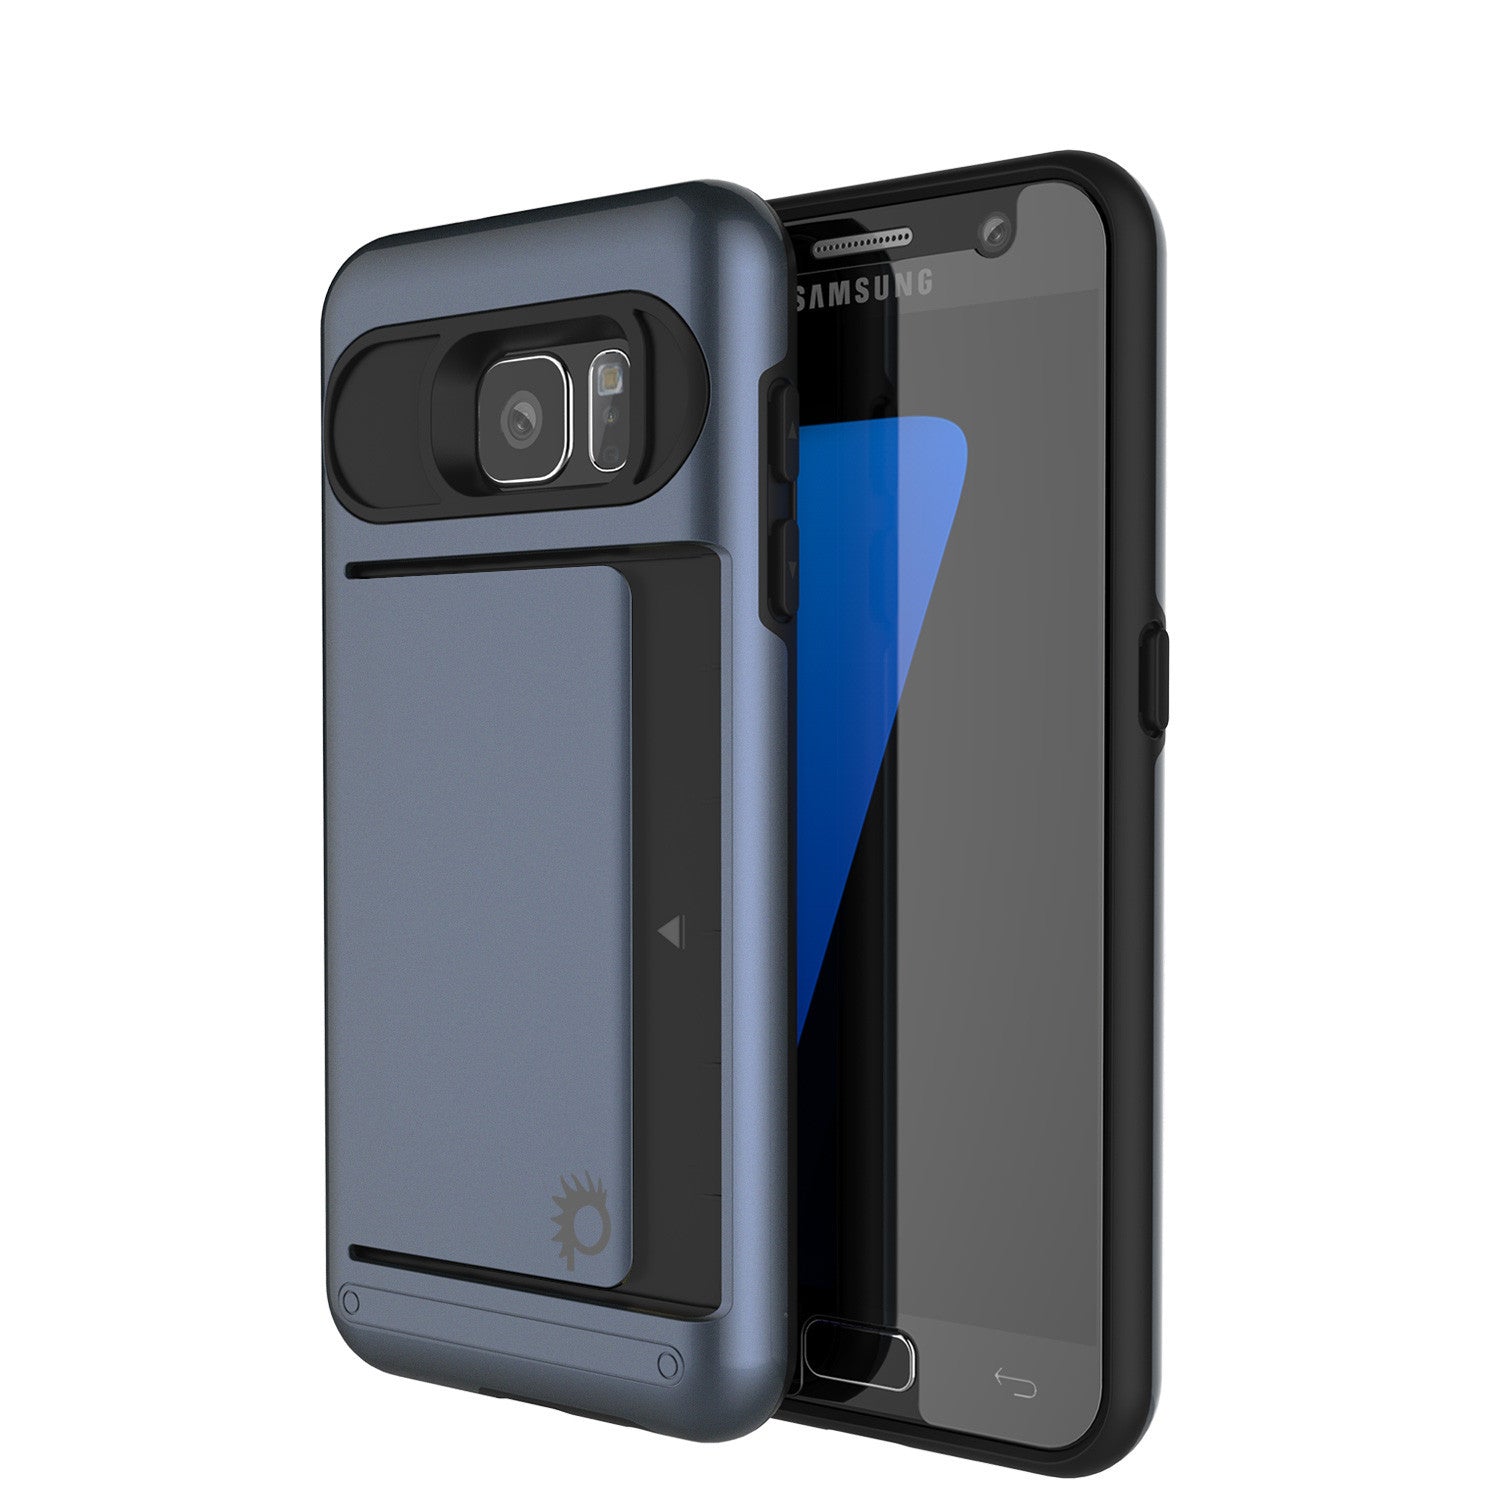 Galaxy S7 EDGE Case PunkCase CLUTCH Navy Series Slim Armor Soft Cover Case w/ Screen Protector (Color in image: Navy)